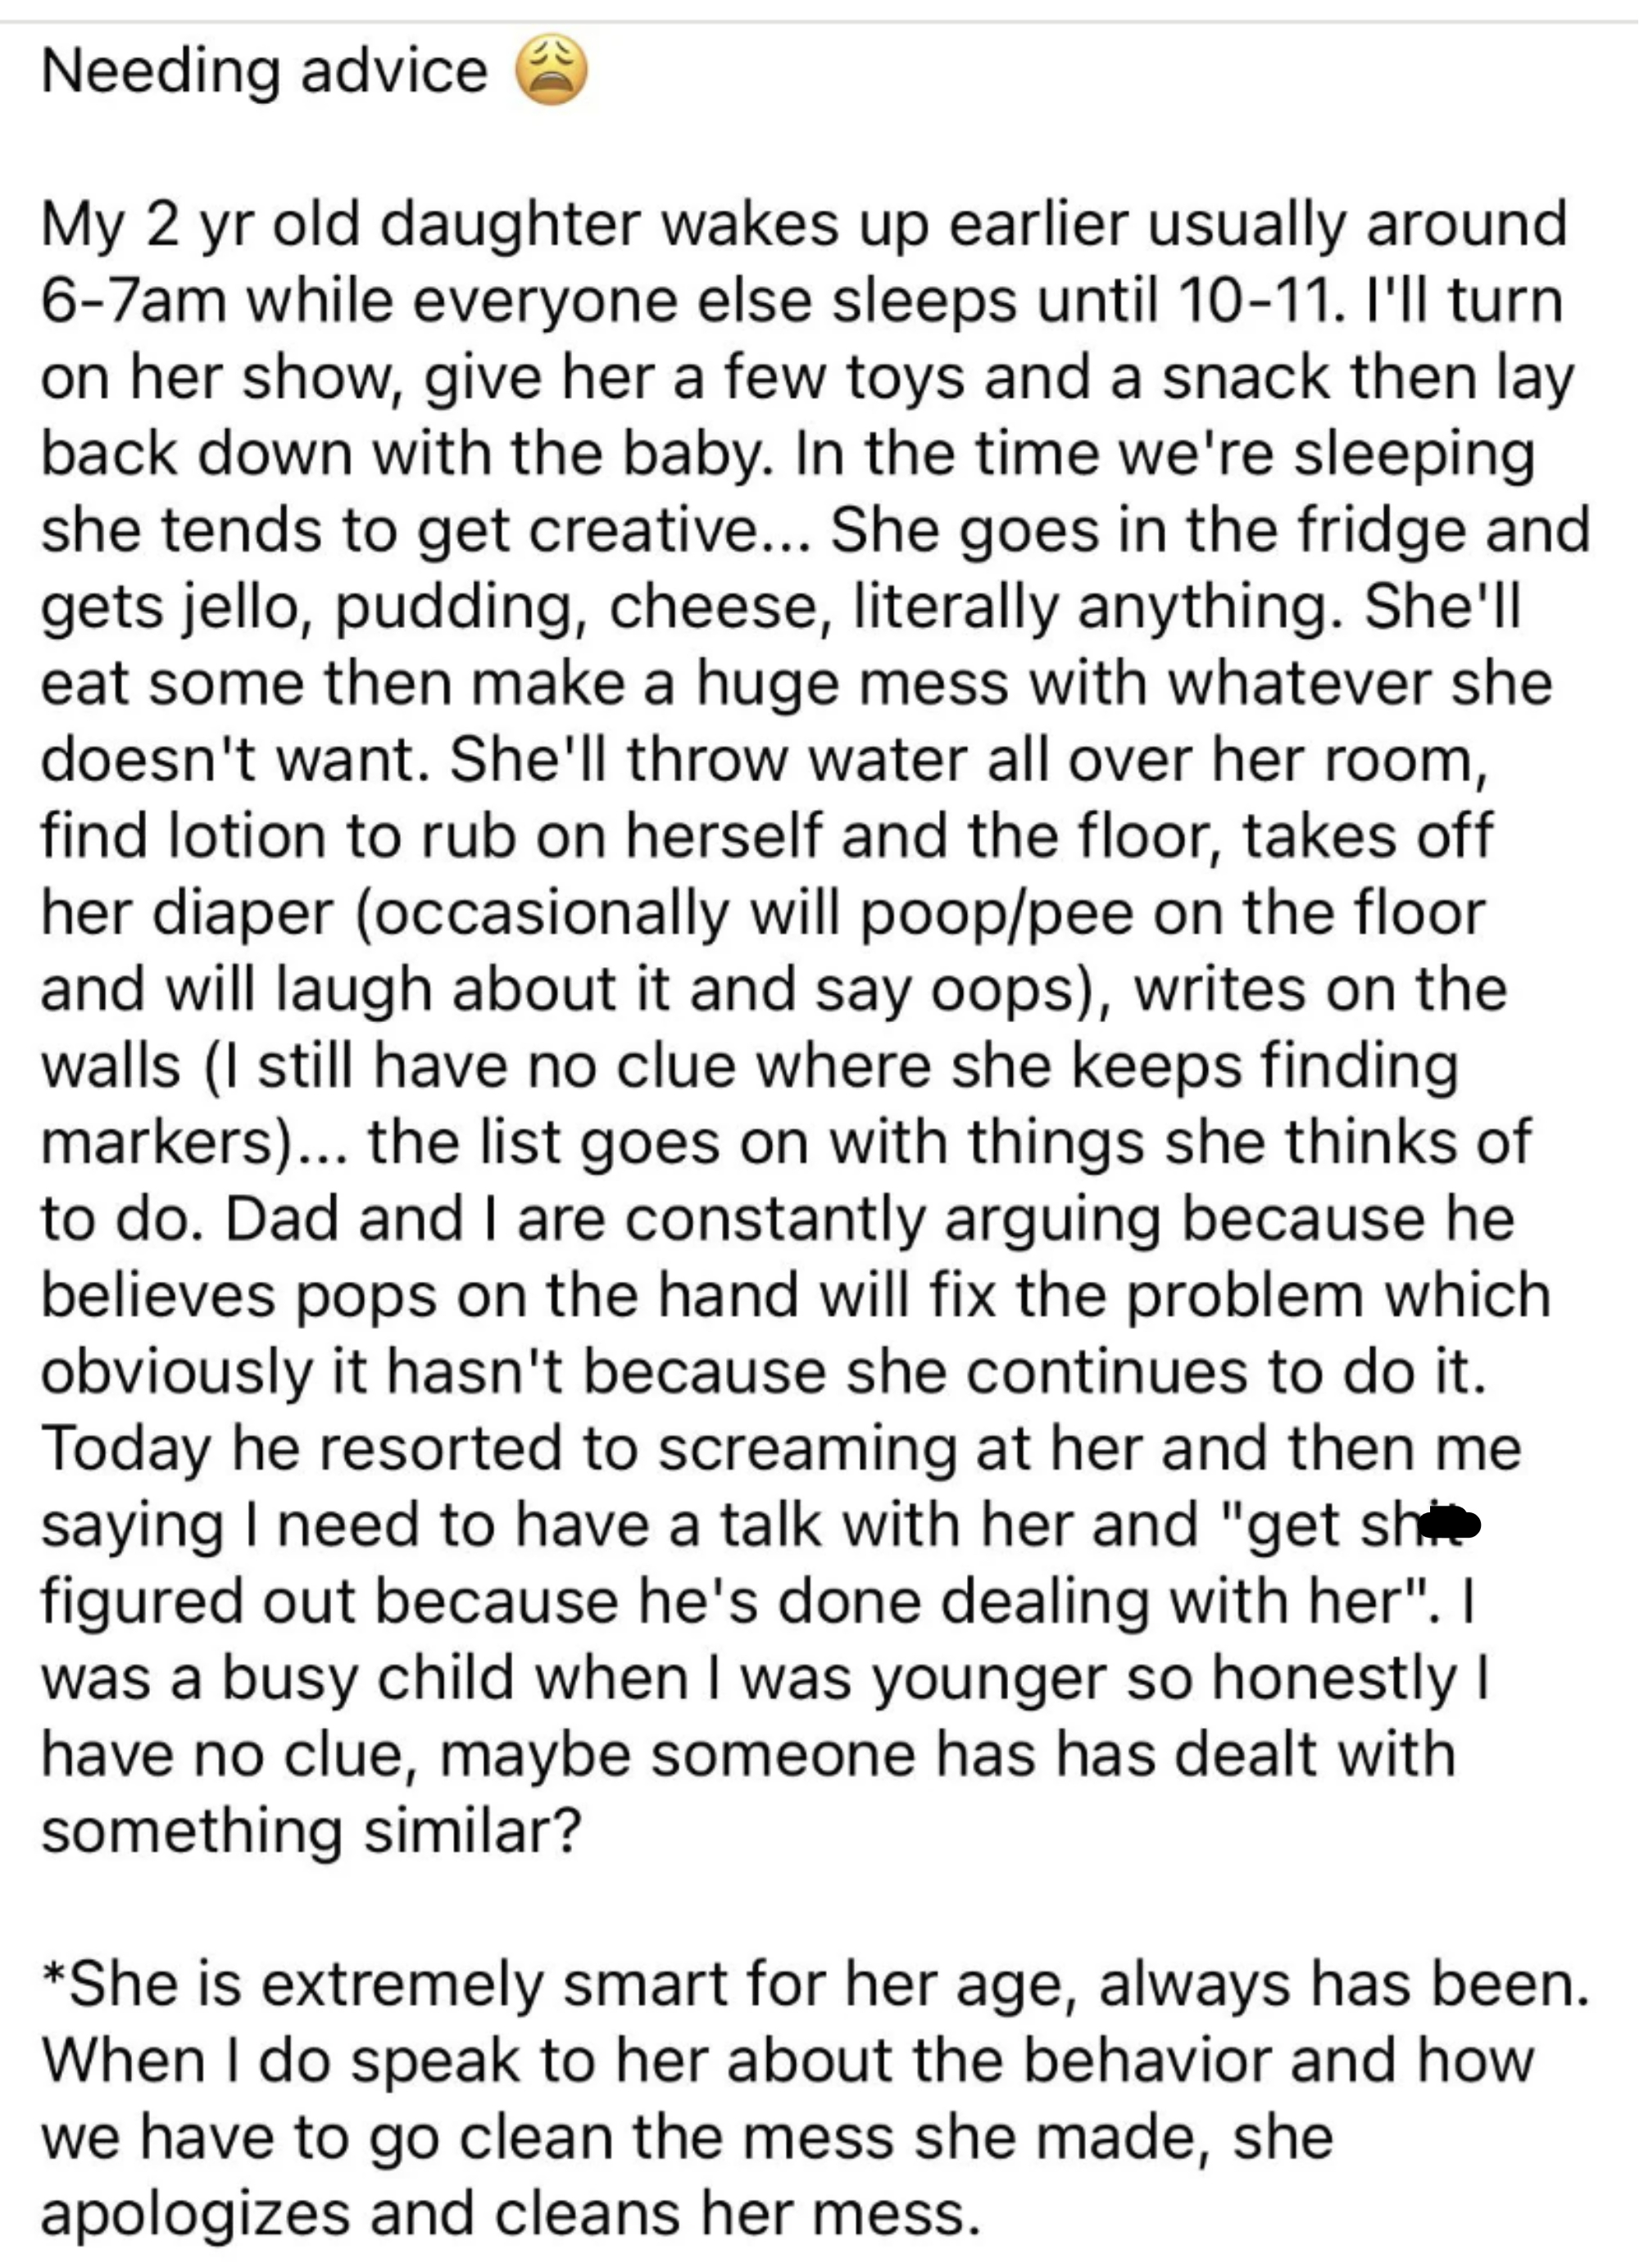 post asking for advice on what to do with a wild toddler who makes messes while the parent sleeps